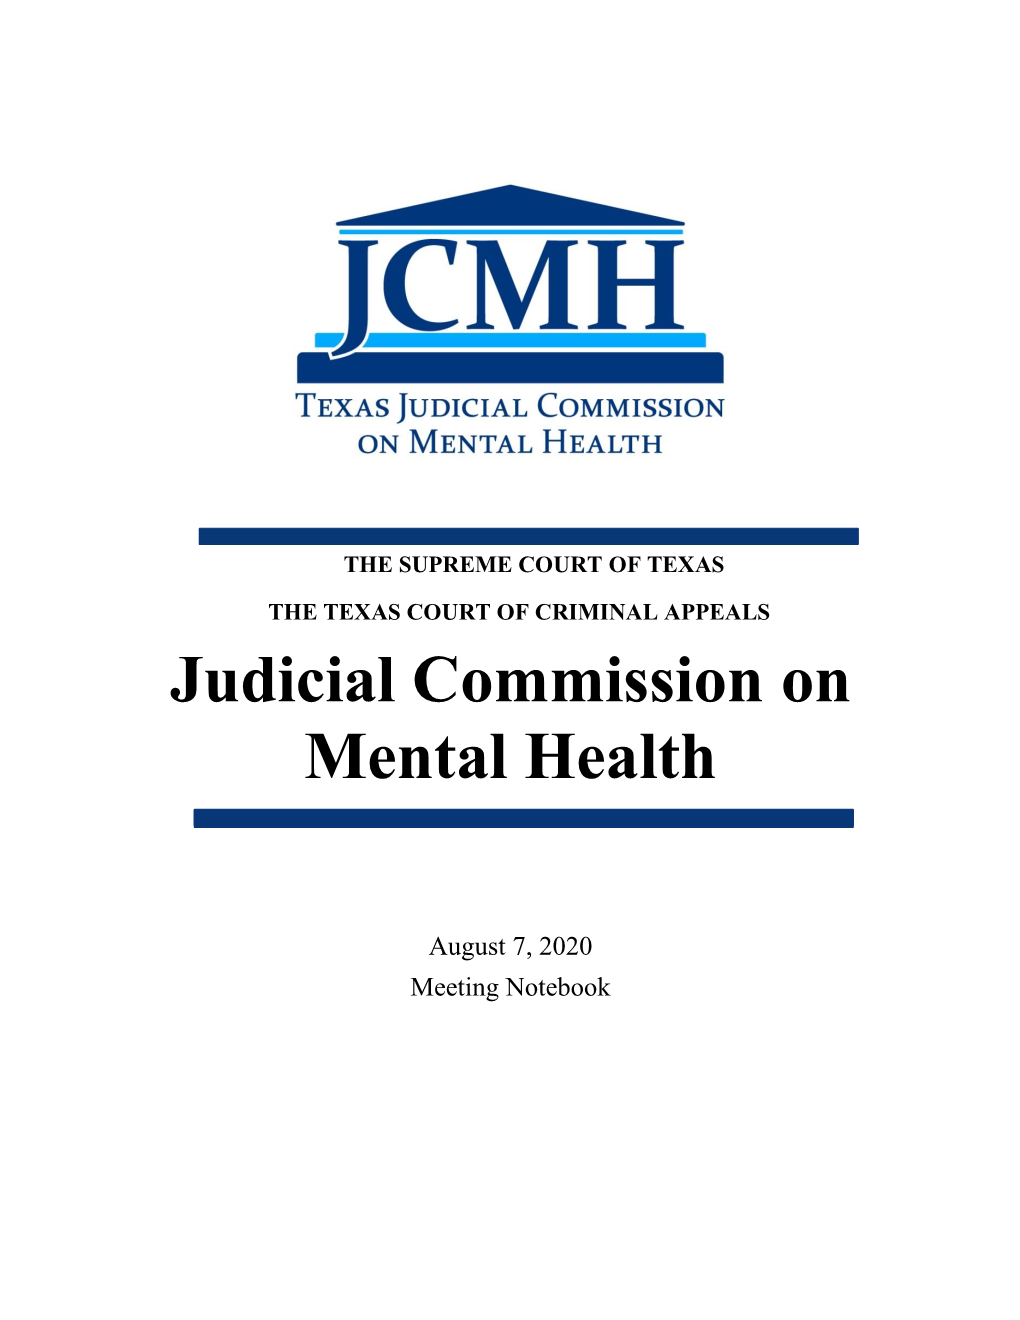 August 7, 2020 Commission Meeting Notebook